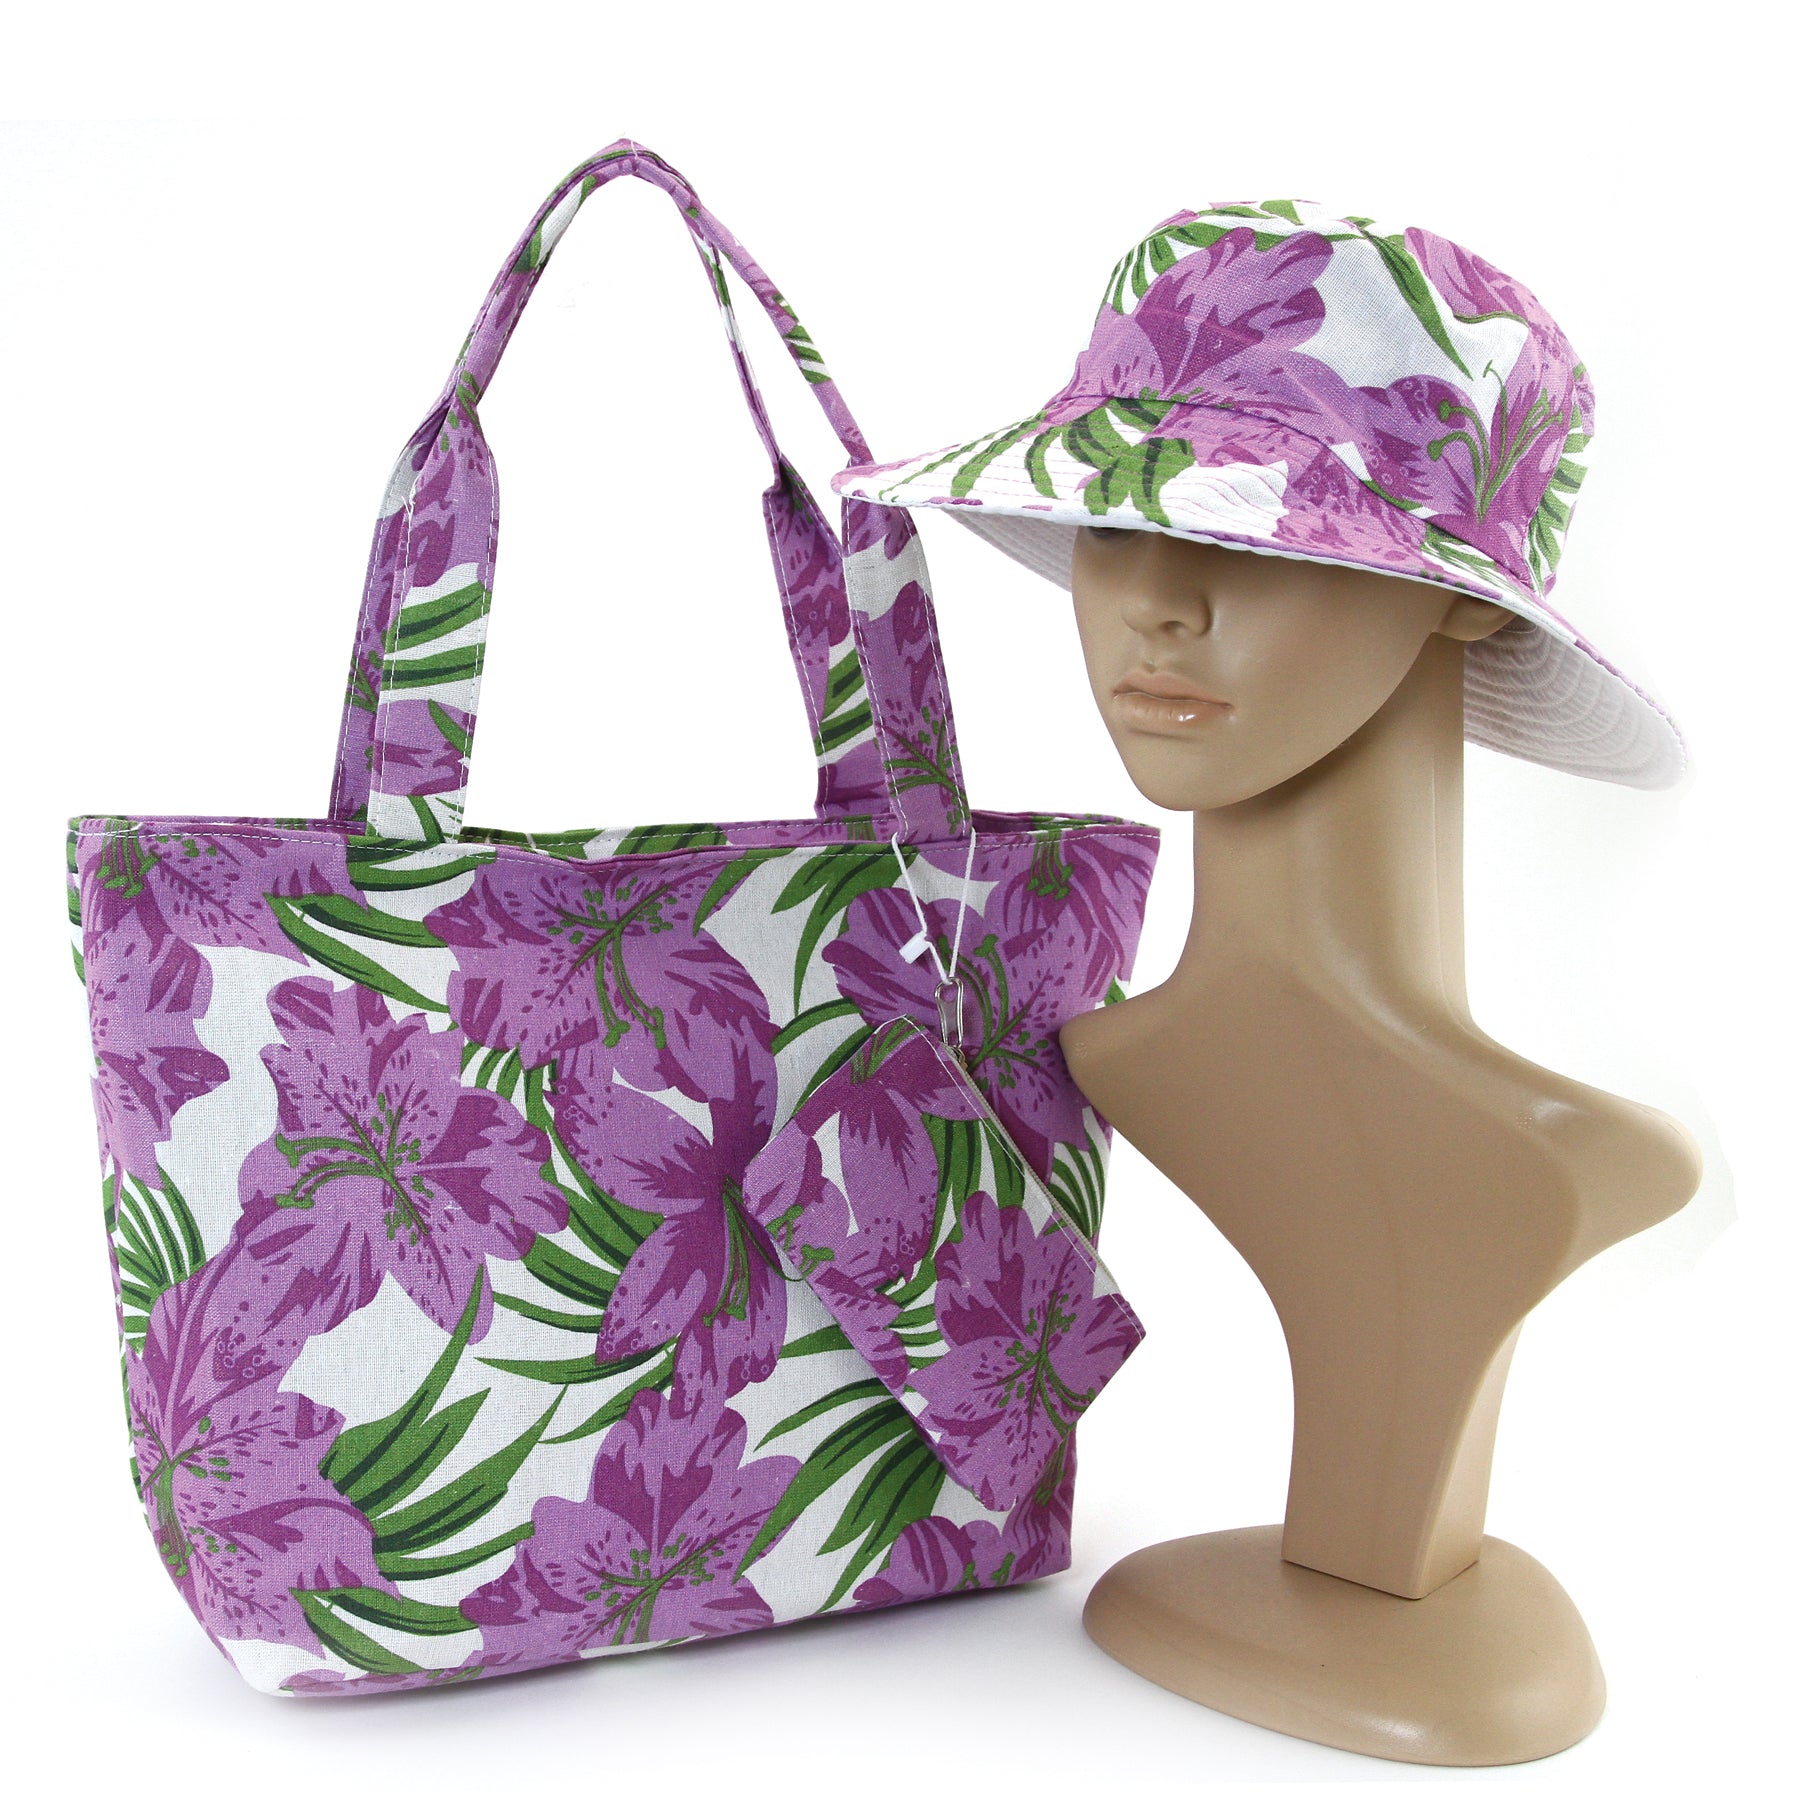 Colorful Matching Tote, Hat and Wallet in Canvas Material, front view